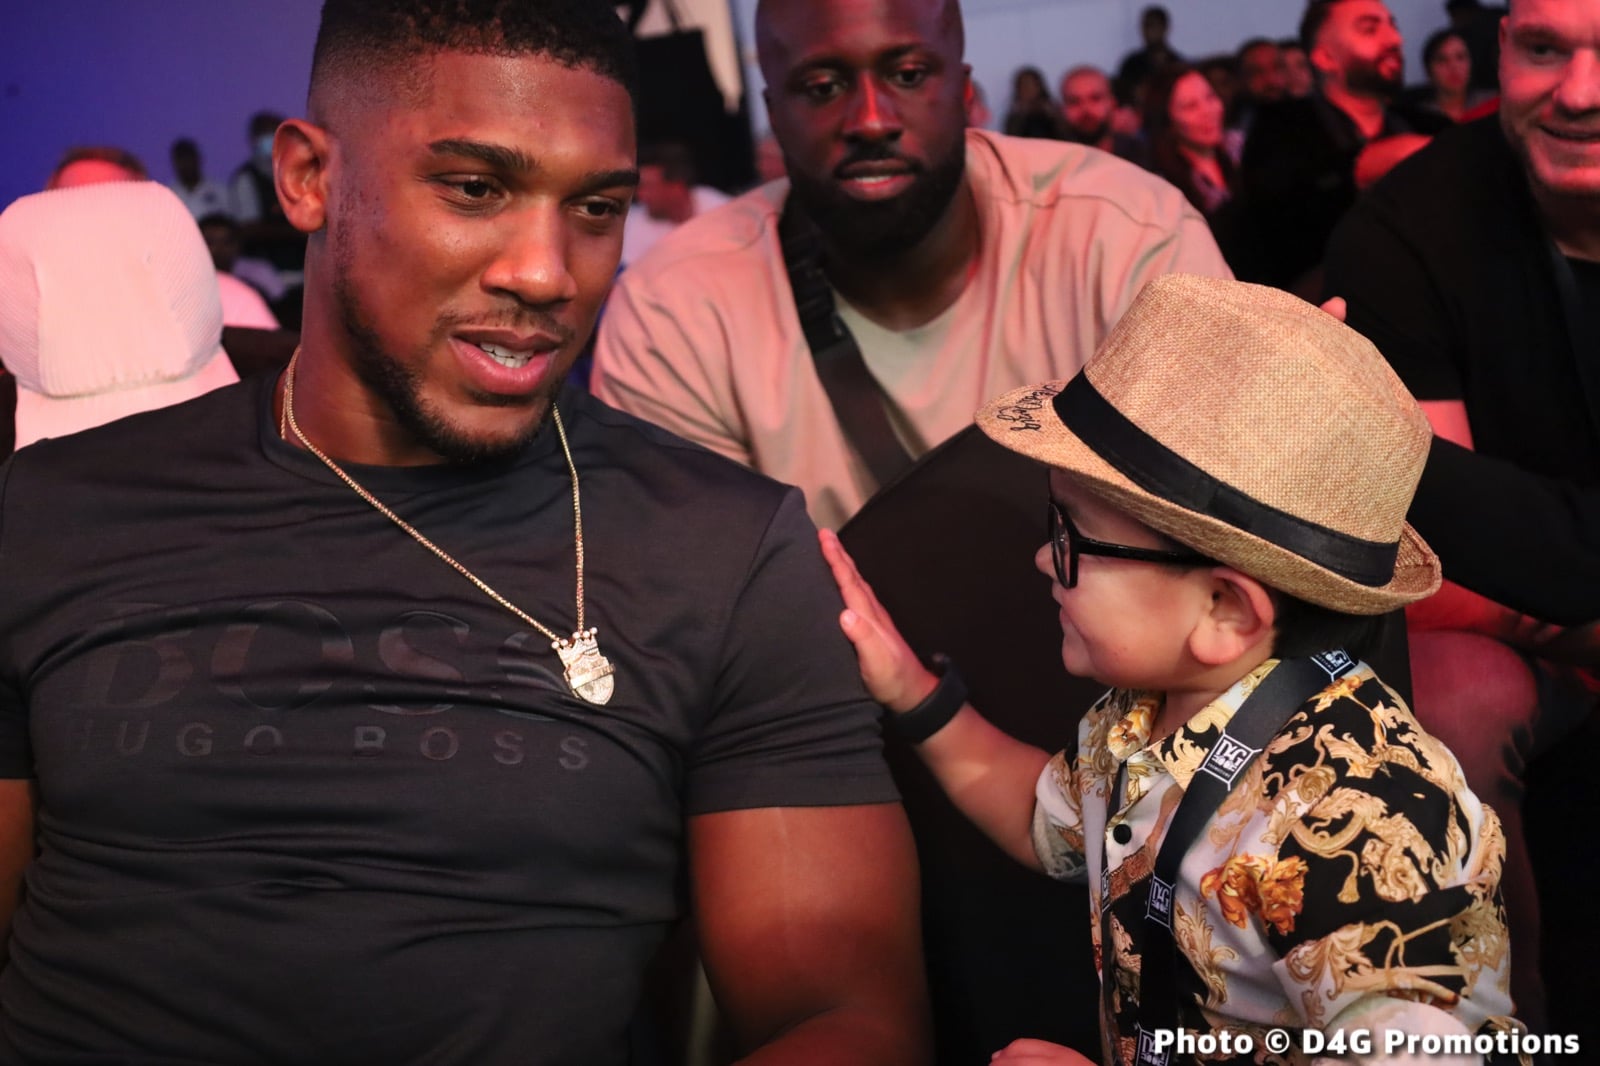 Image: Anthony Joshua not ruling out taking step aside "if money's right"